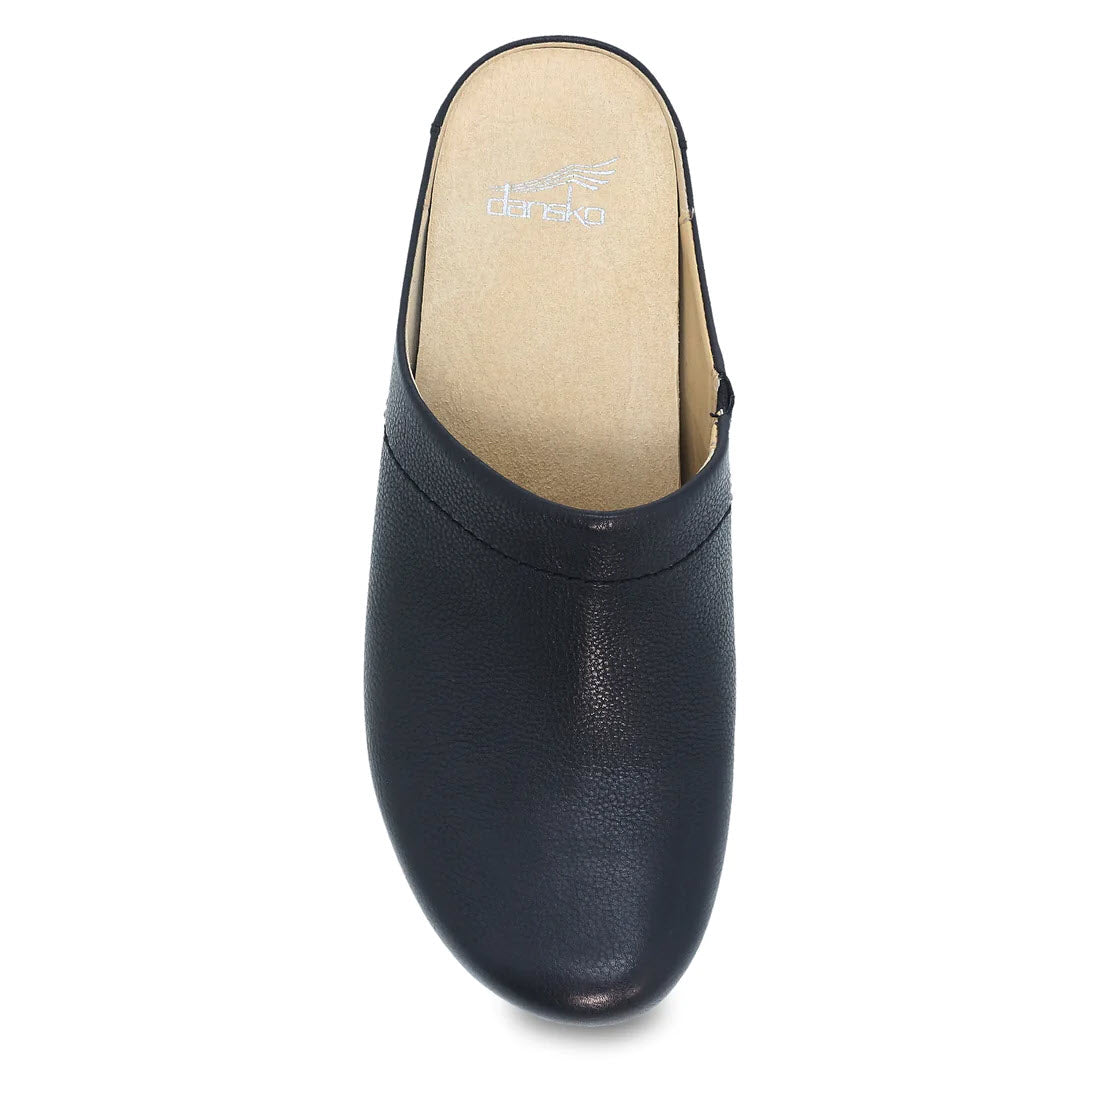 Dansko Mariella black leather open back clog viewed from above.